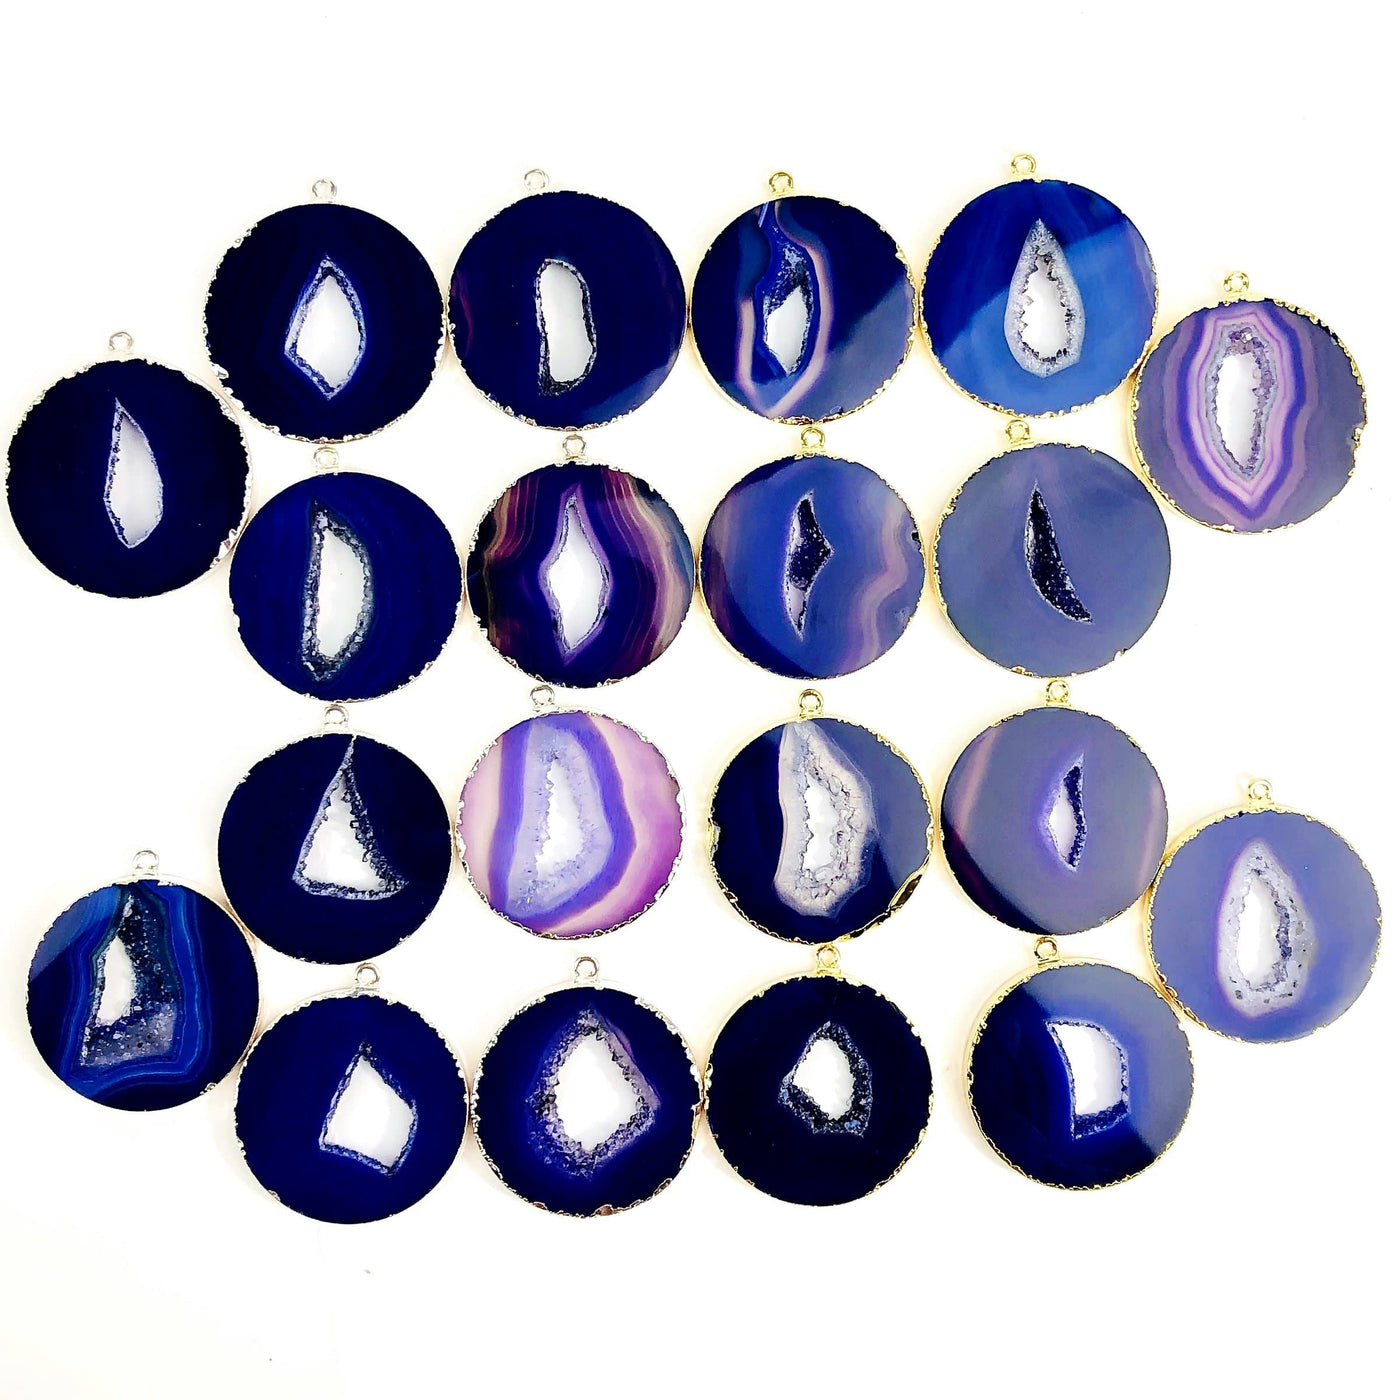 Multiple Purple Agate Circle Slice Pendants to show color and pattern variation.